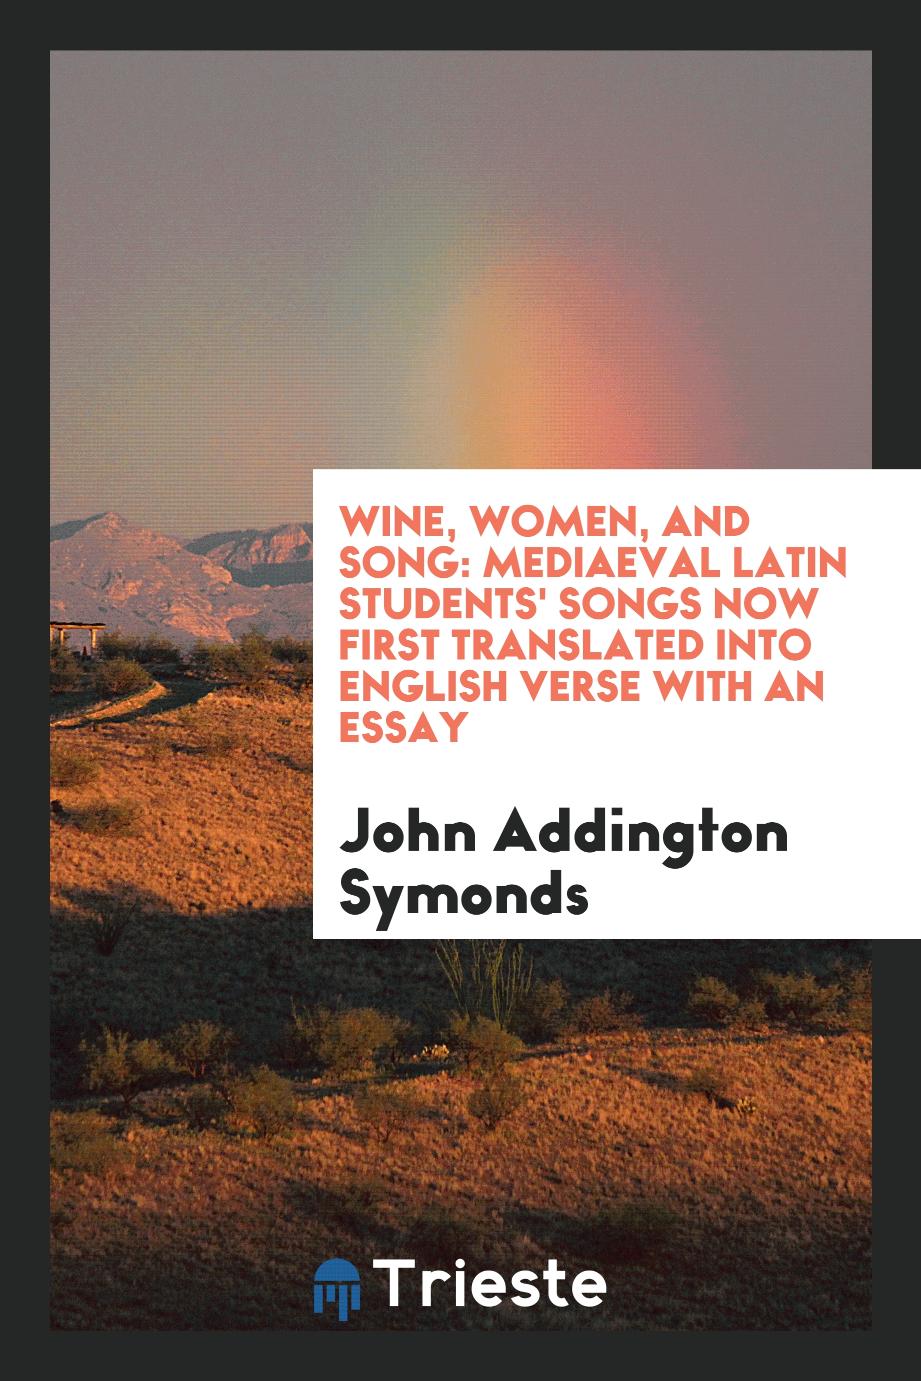 Wine, women, and song: mediaeval Latin students' songs now first translated into English verse with an essay